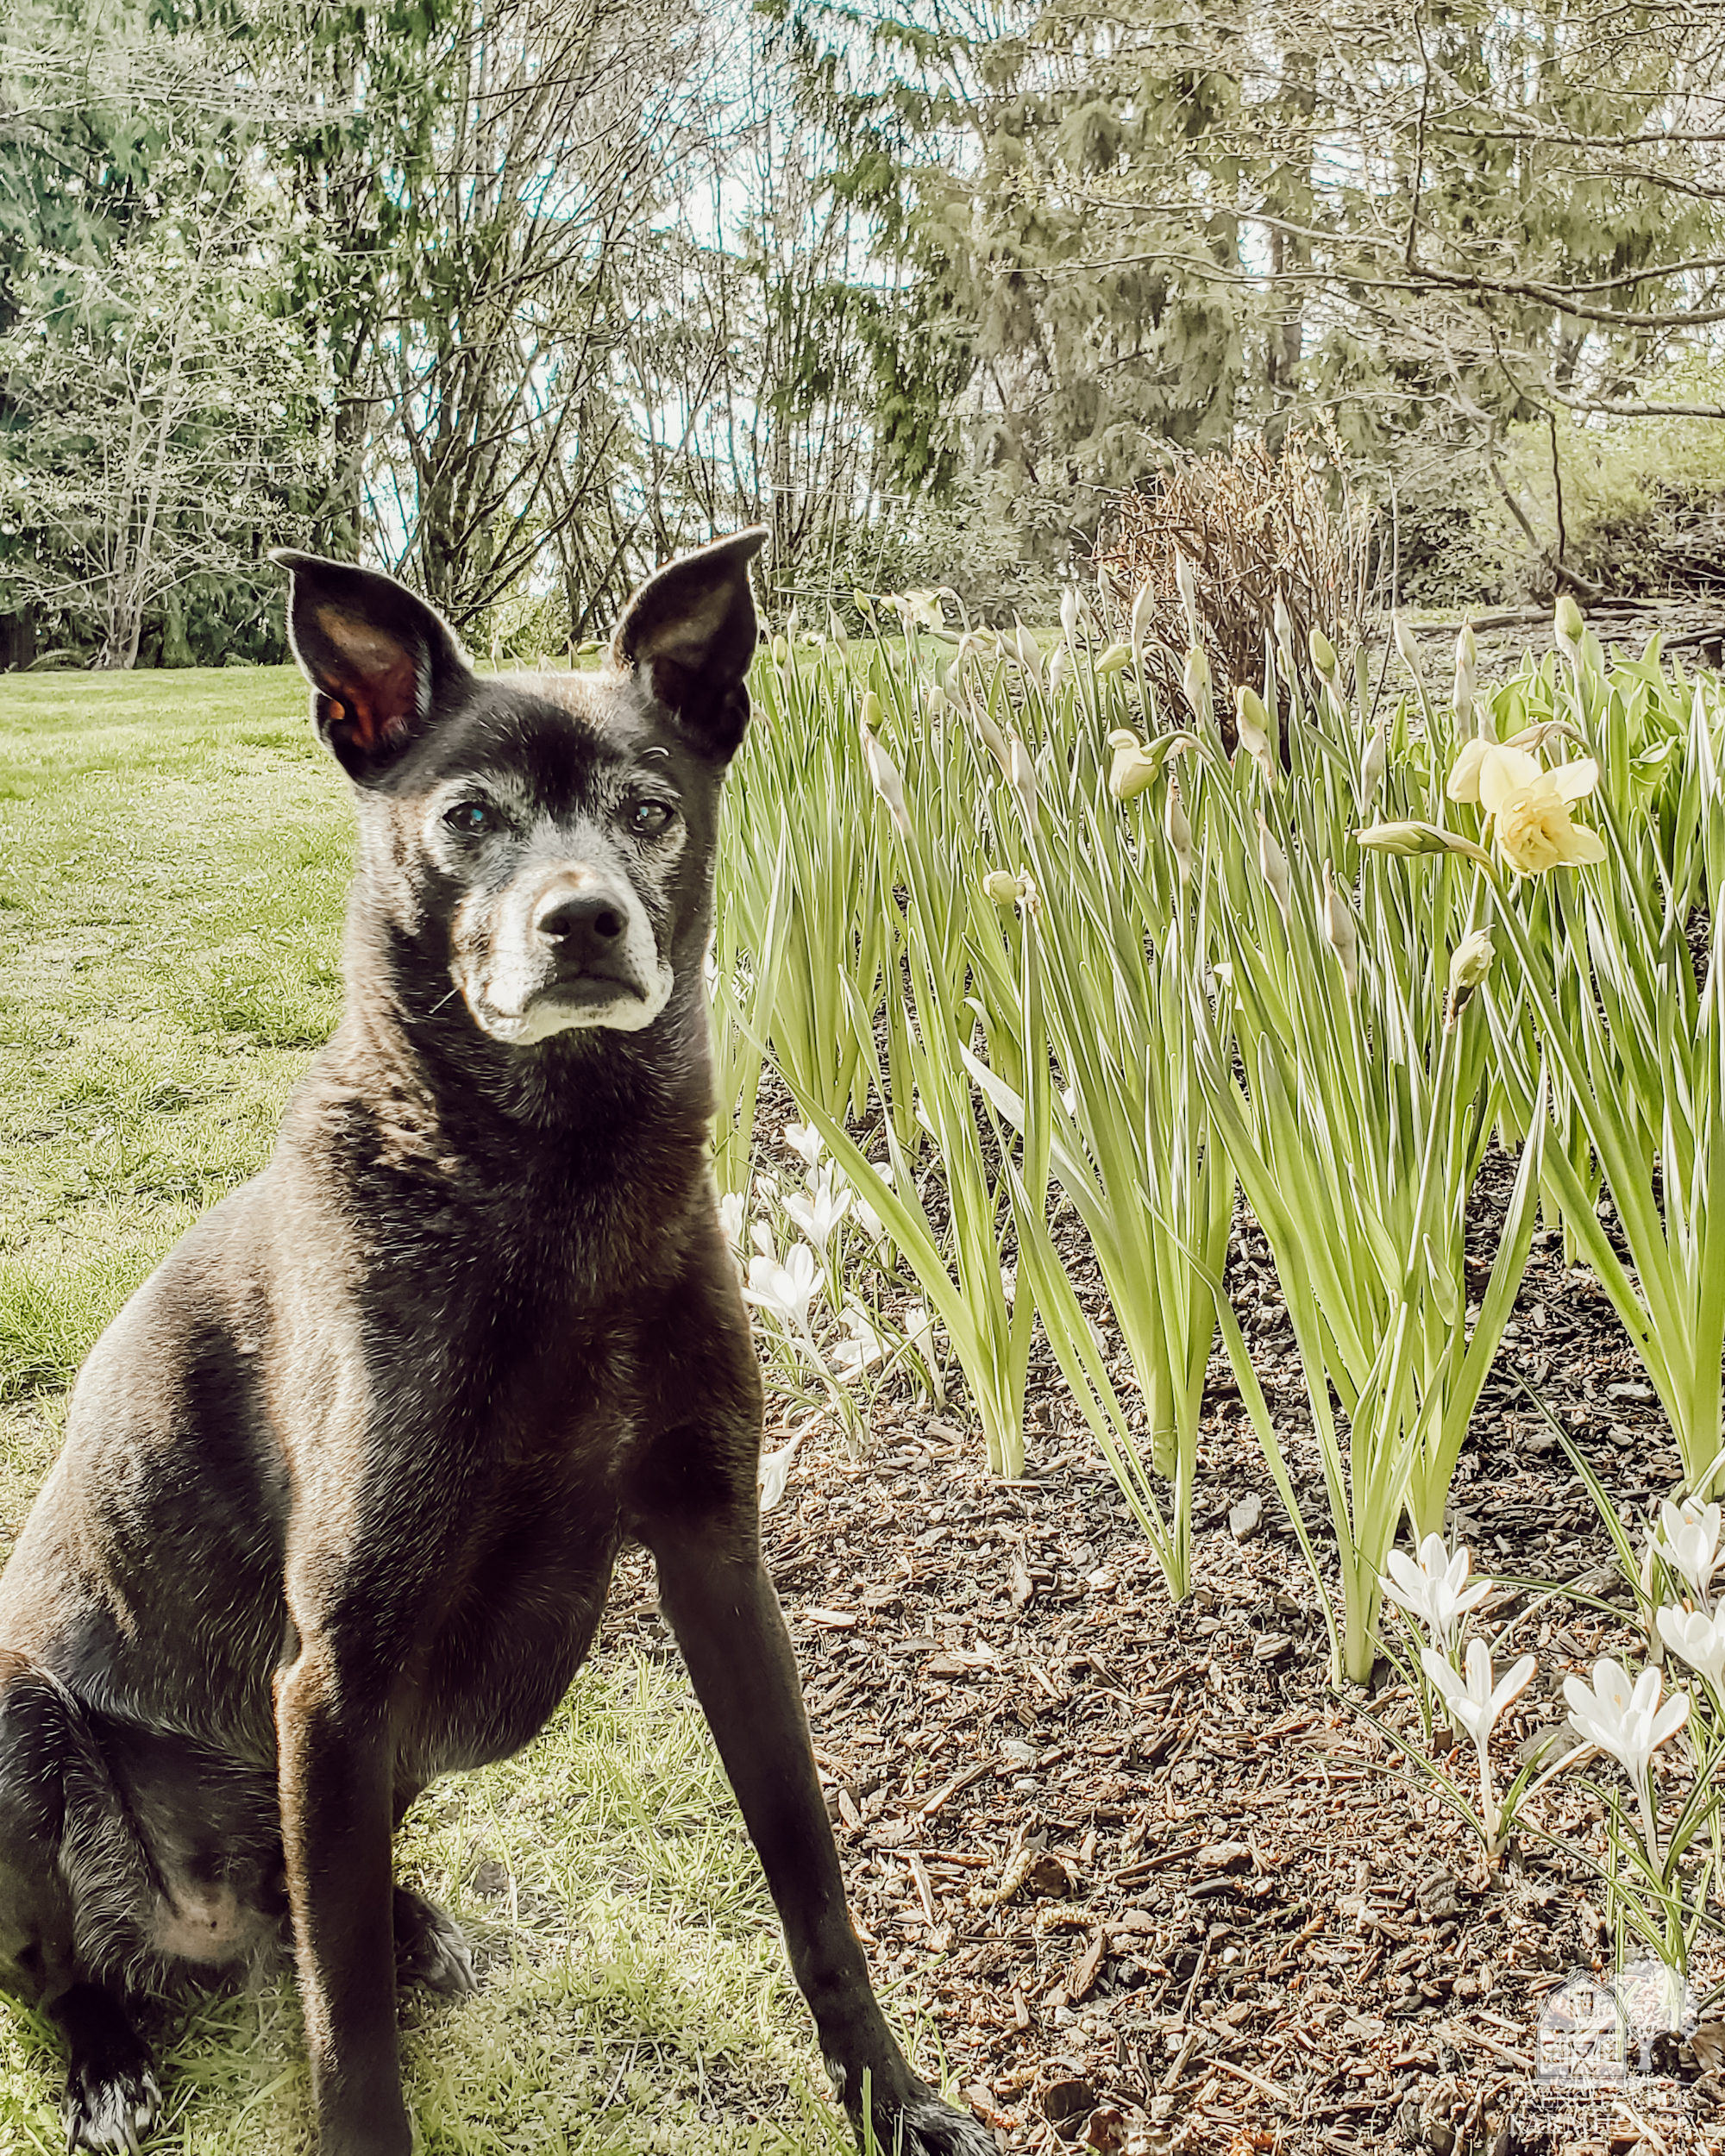 Aspen stands guard over the daffodils and crocus